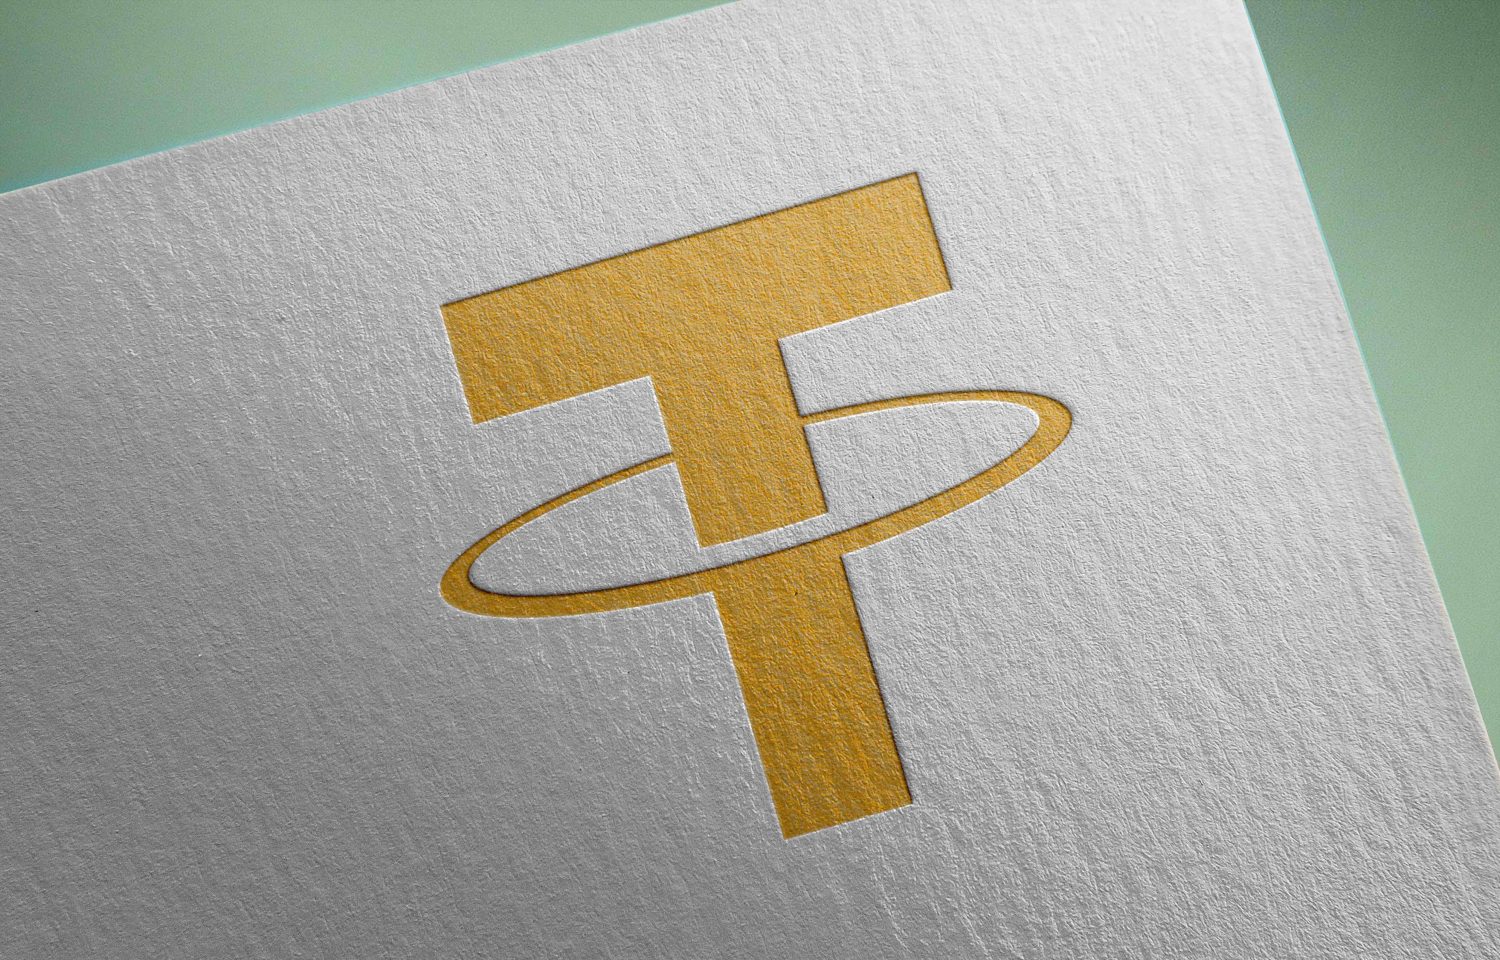 Tether Stablecoin To Launch On Algorand Blockchain